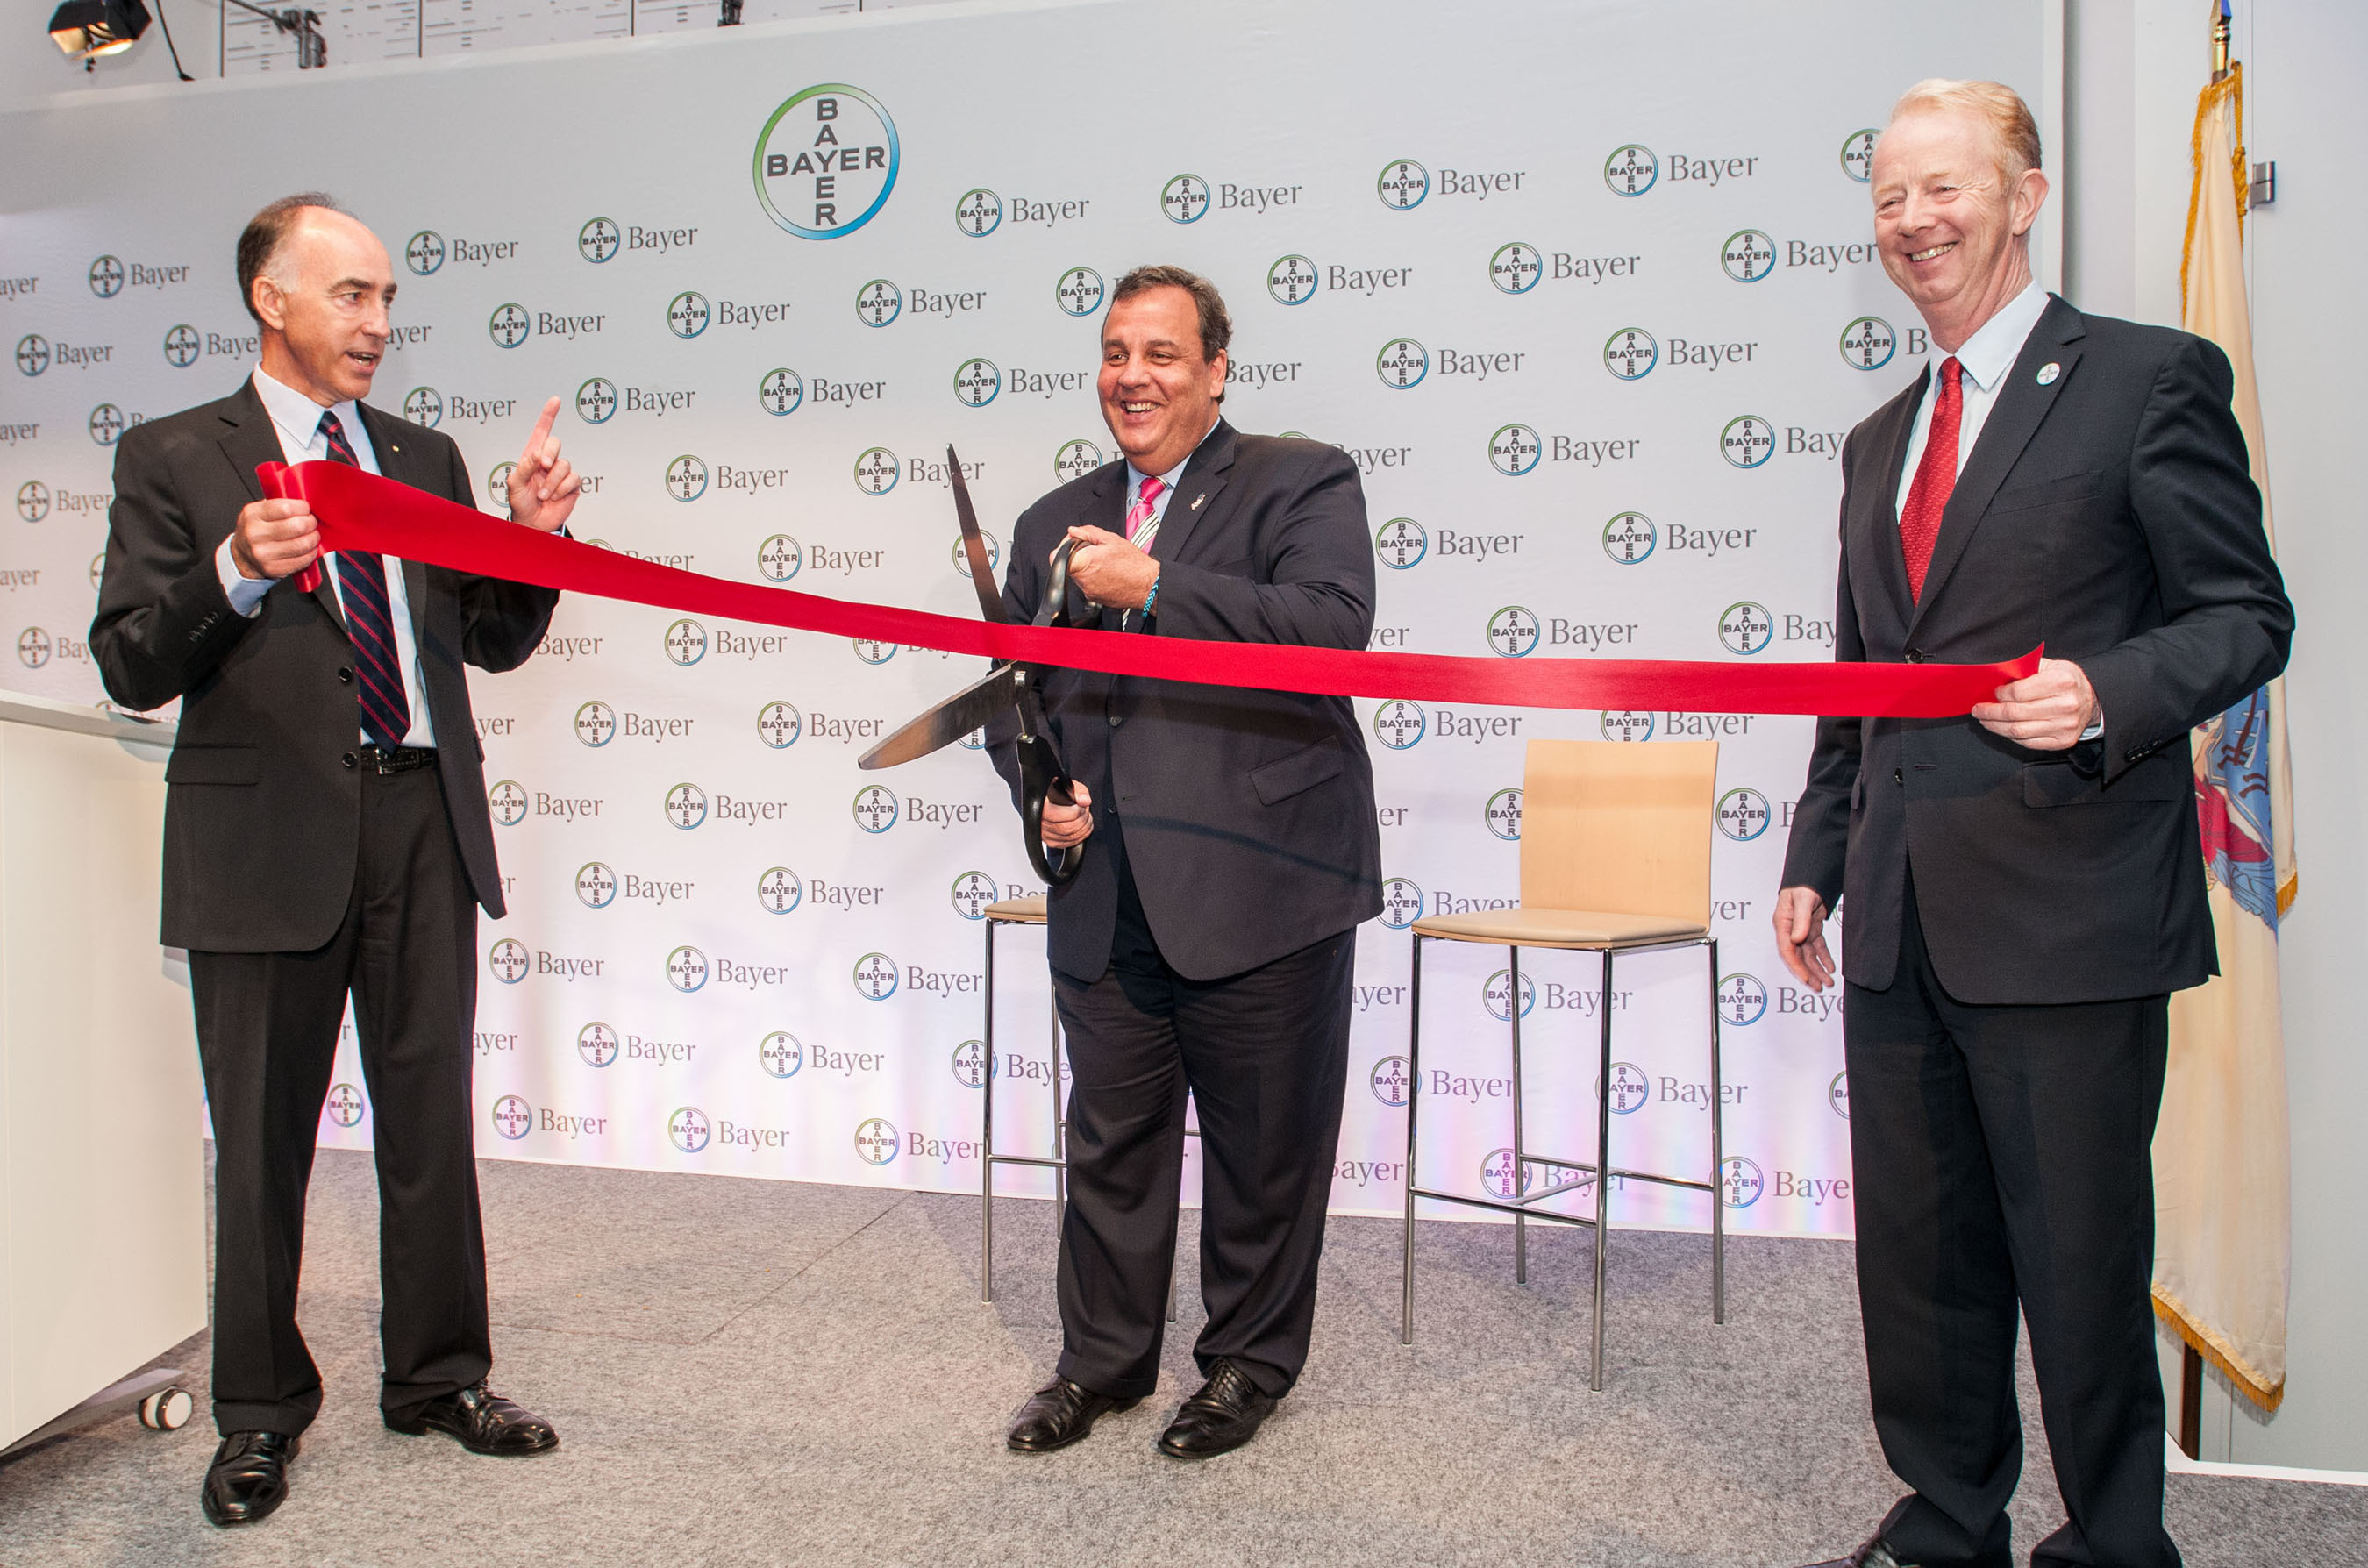 The honorable Chris Christie, Governor, State of New Jersey joins President of Bayer HealthCare Phil Blake, and Marijn Dekkers, Chairman, Bayer AG Group, Board of Management at the ribbon cutting ceremony for the grand opening of the new Bayer HealthCare U.S. headquarters in Whippany, N.J. (PRNewsFoto/Bayer HealthCare) (PRNewsFoto/BAYER HEALTHCARE)